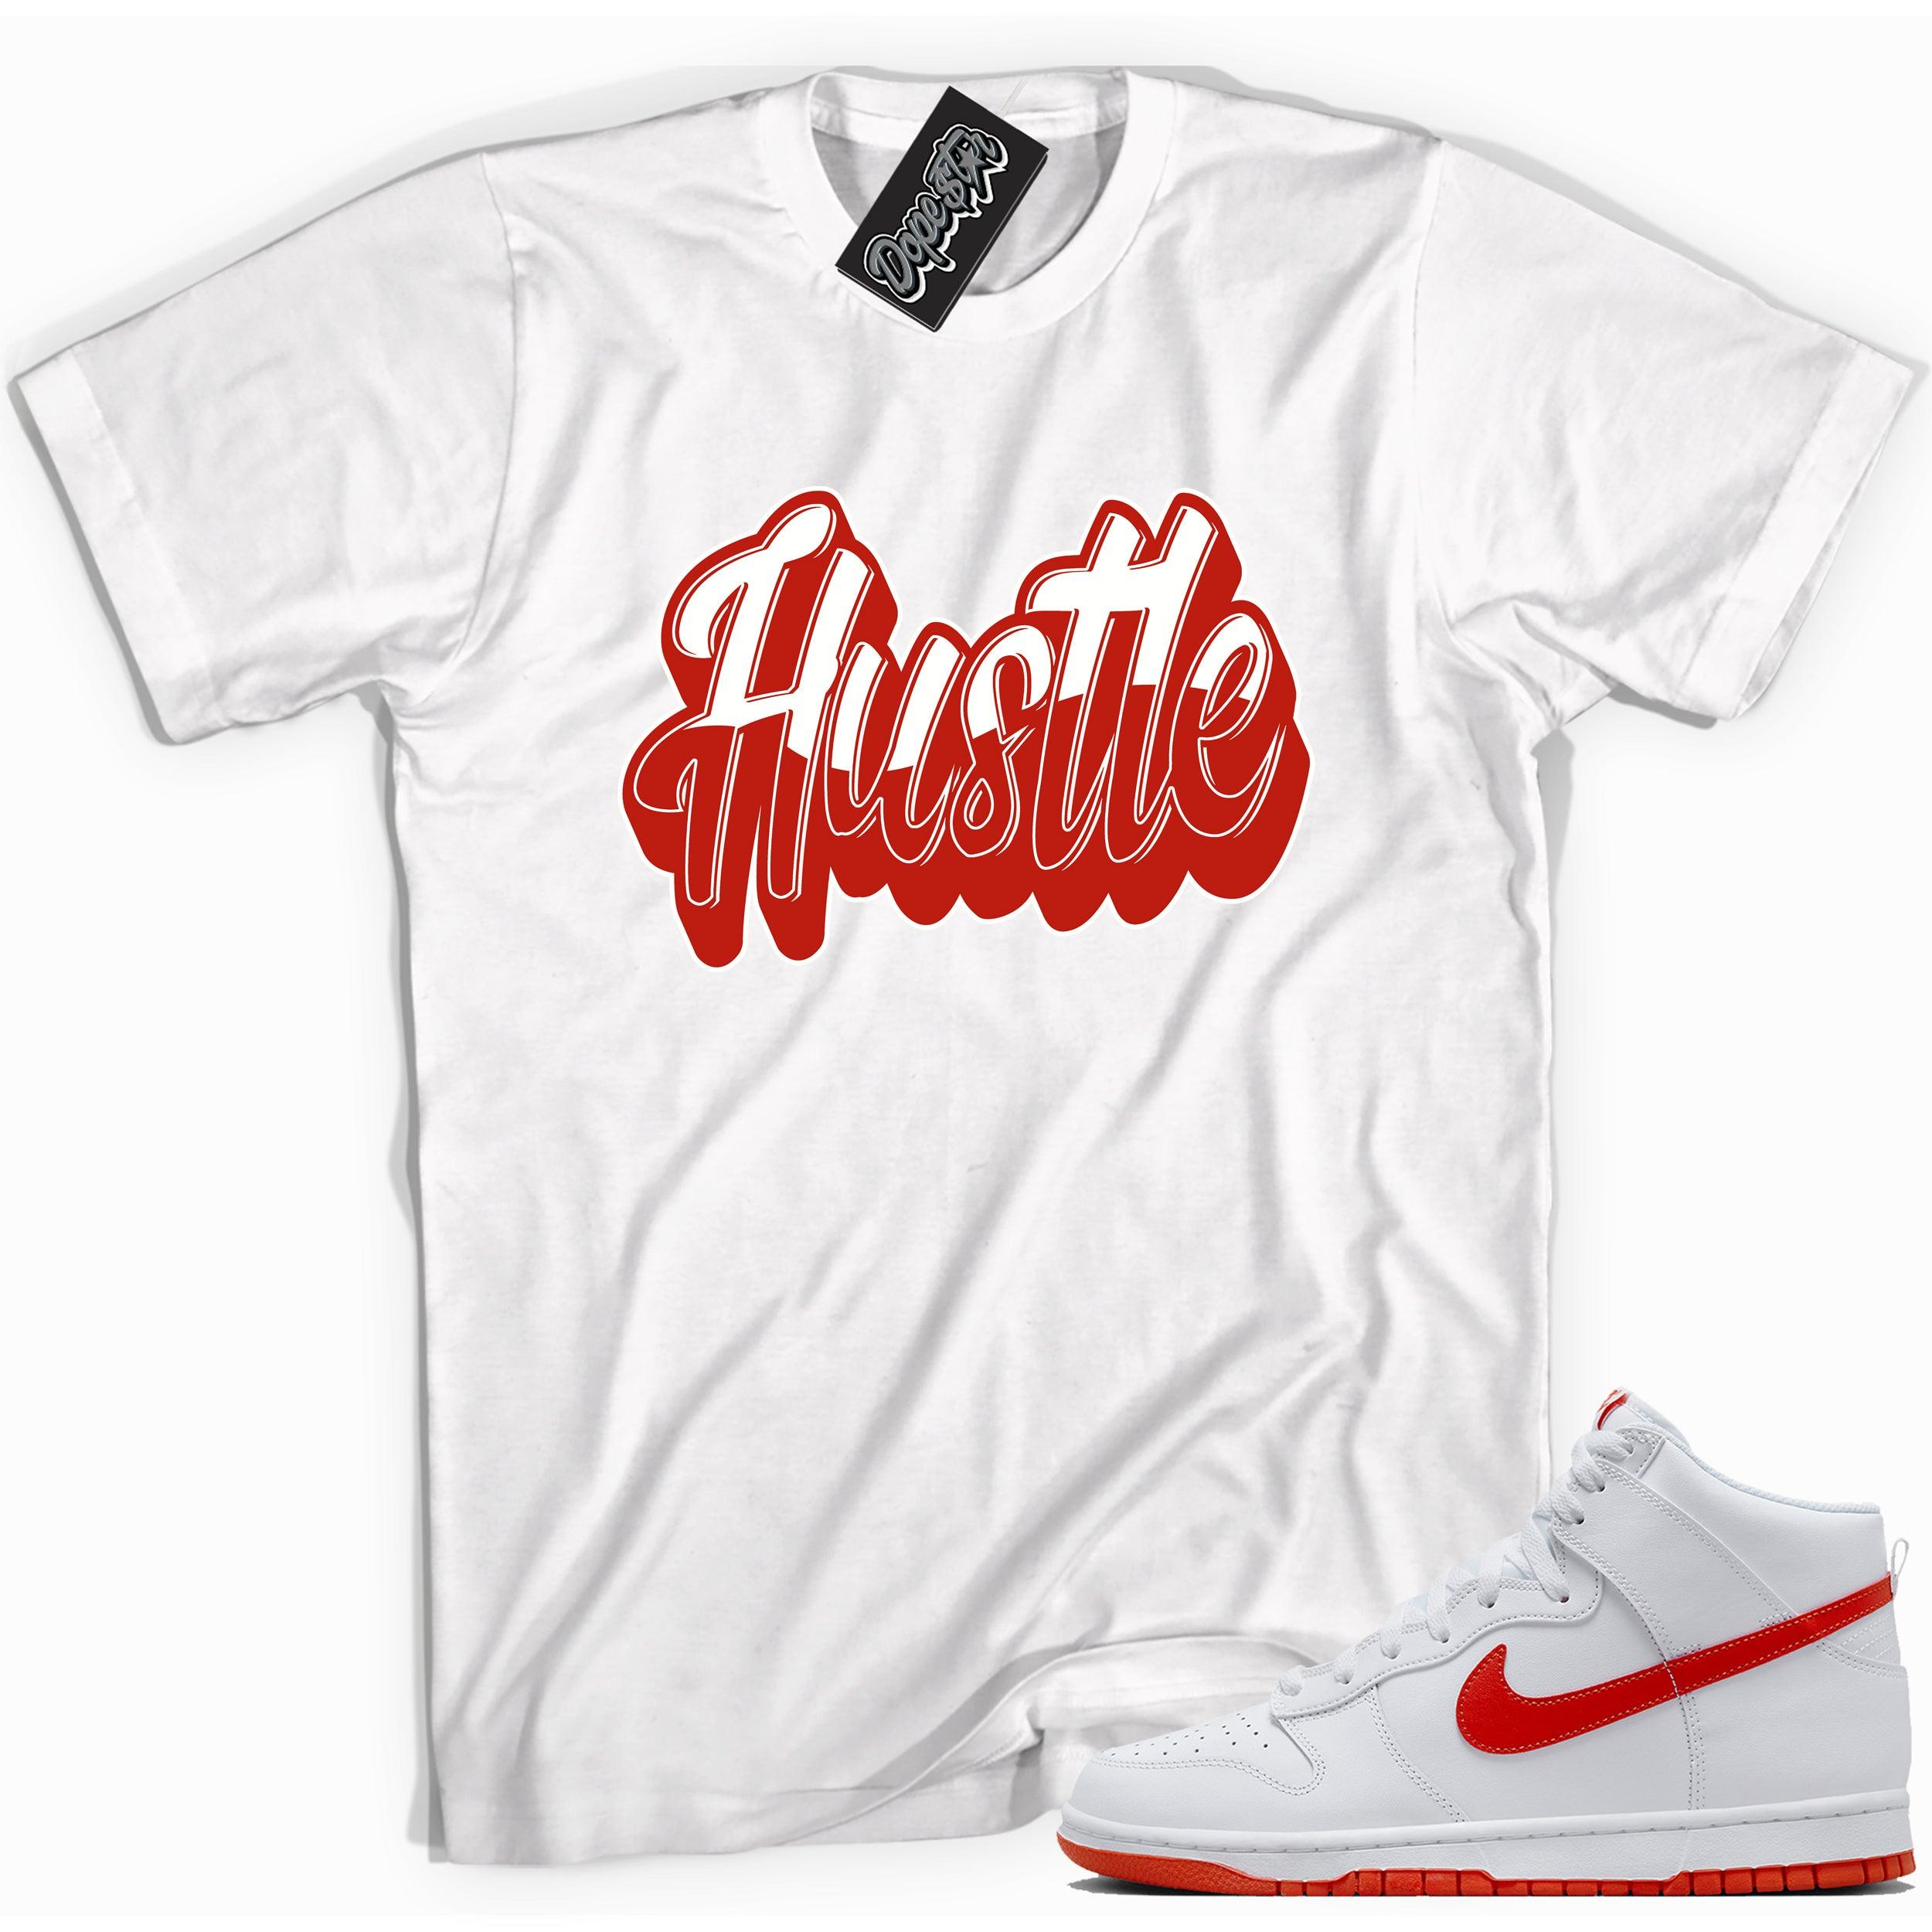 Cool white graphic tee with 'hustle' print, that perfectly matches Nike Dunk High White Picante Red sneakers.